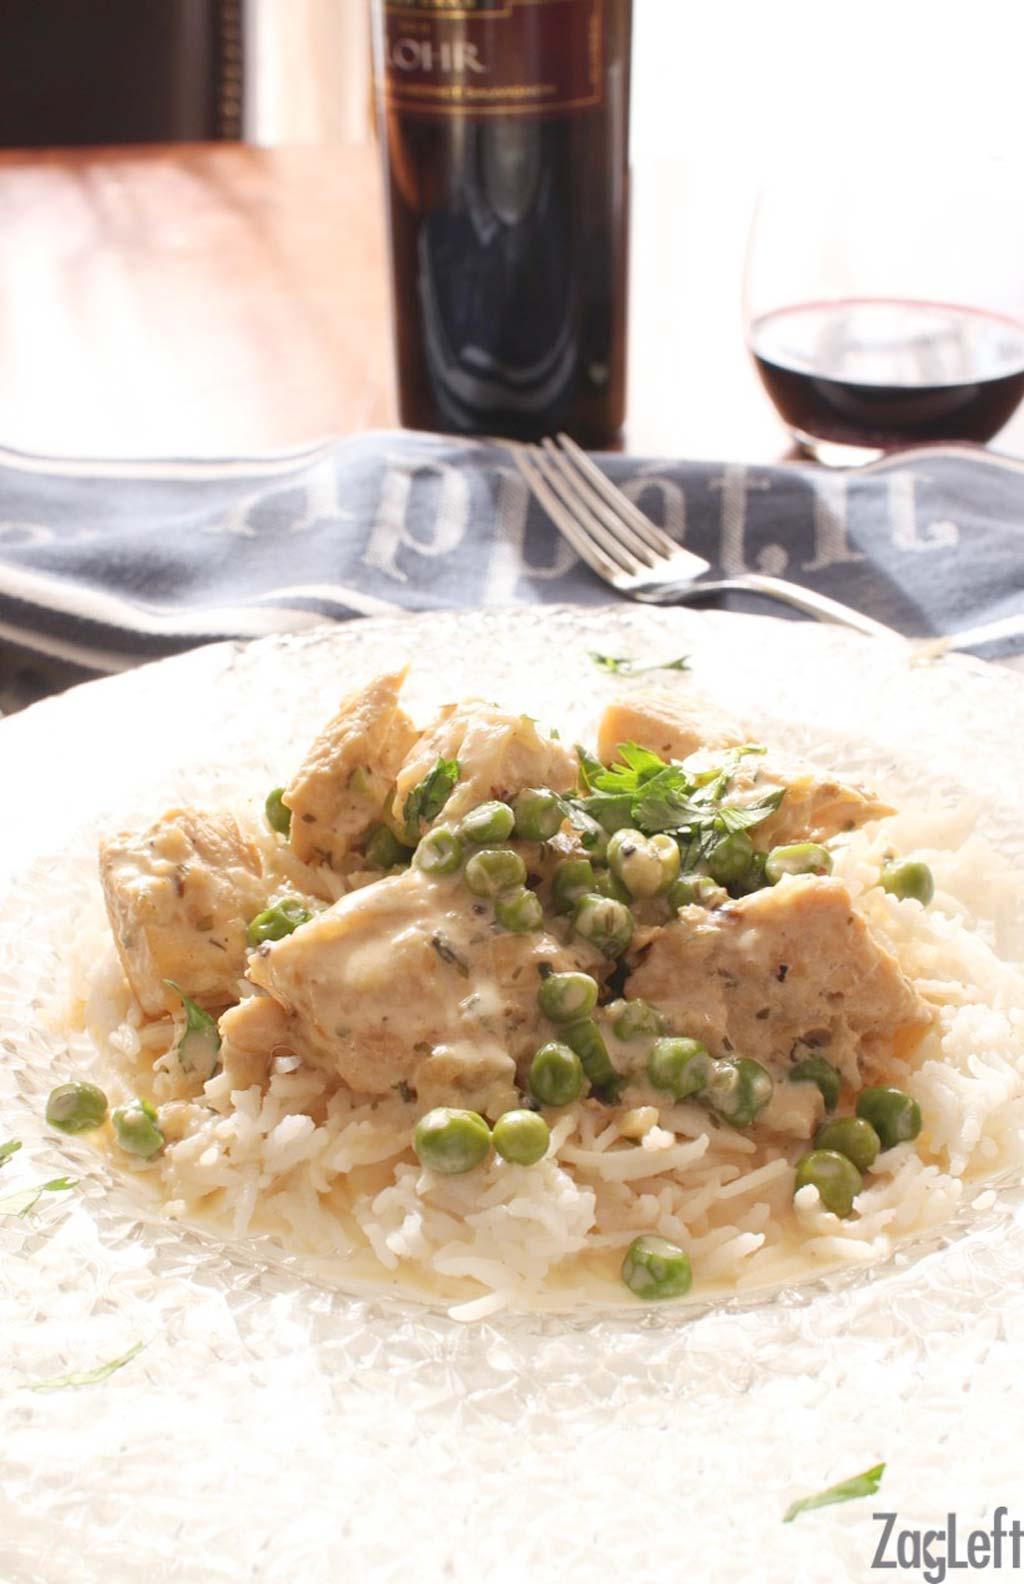 CHICKEN FRICASSEE 1 large chicken breast ¼ teaspoon kosher salt ¼ teaspoon black pepper 1 tablespoon butter ½ tablespoon olive oil ½ cup finely chopped onions 1 garlic clove, minced 1 cup chicken